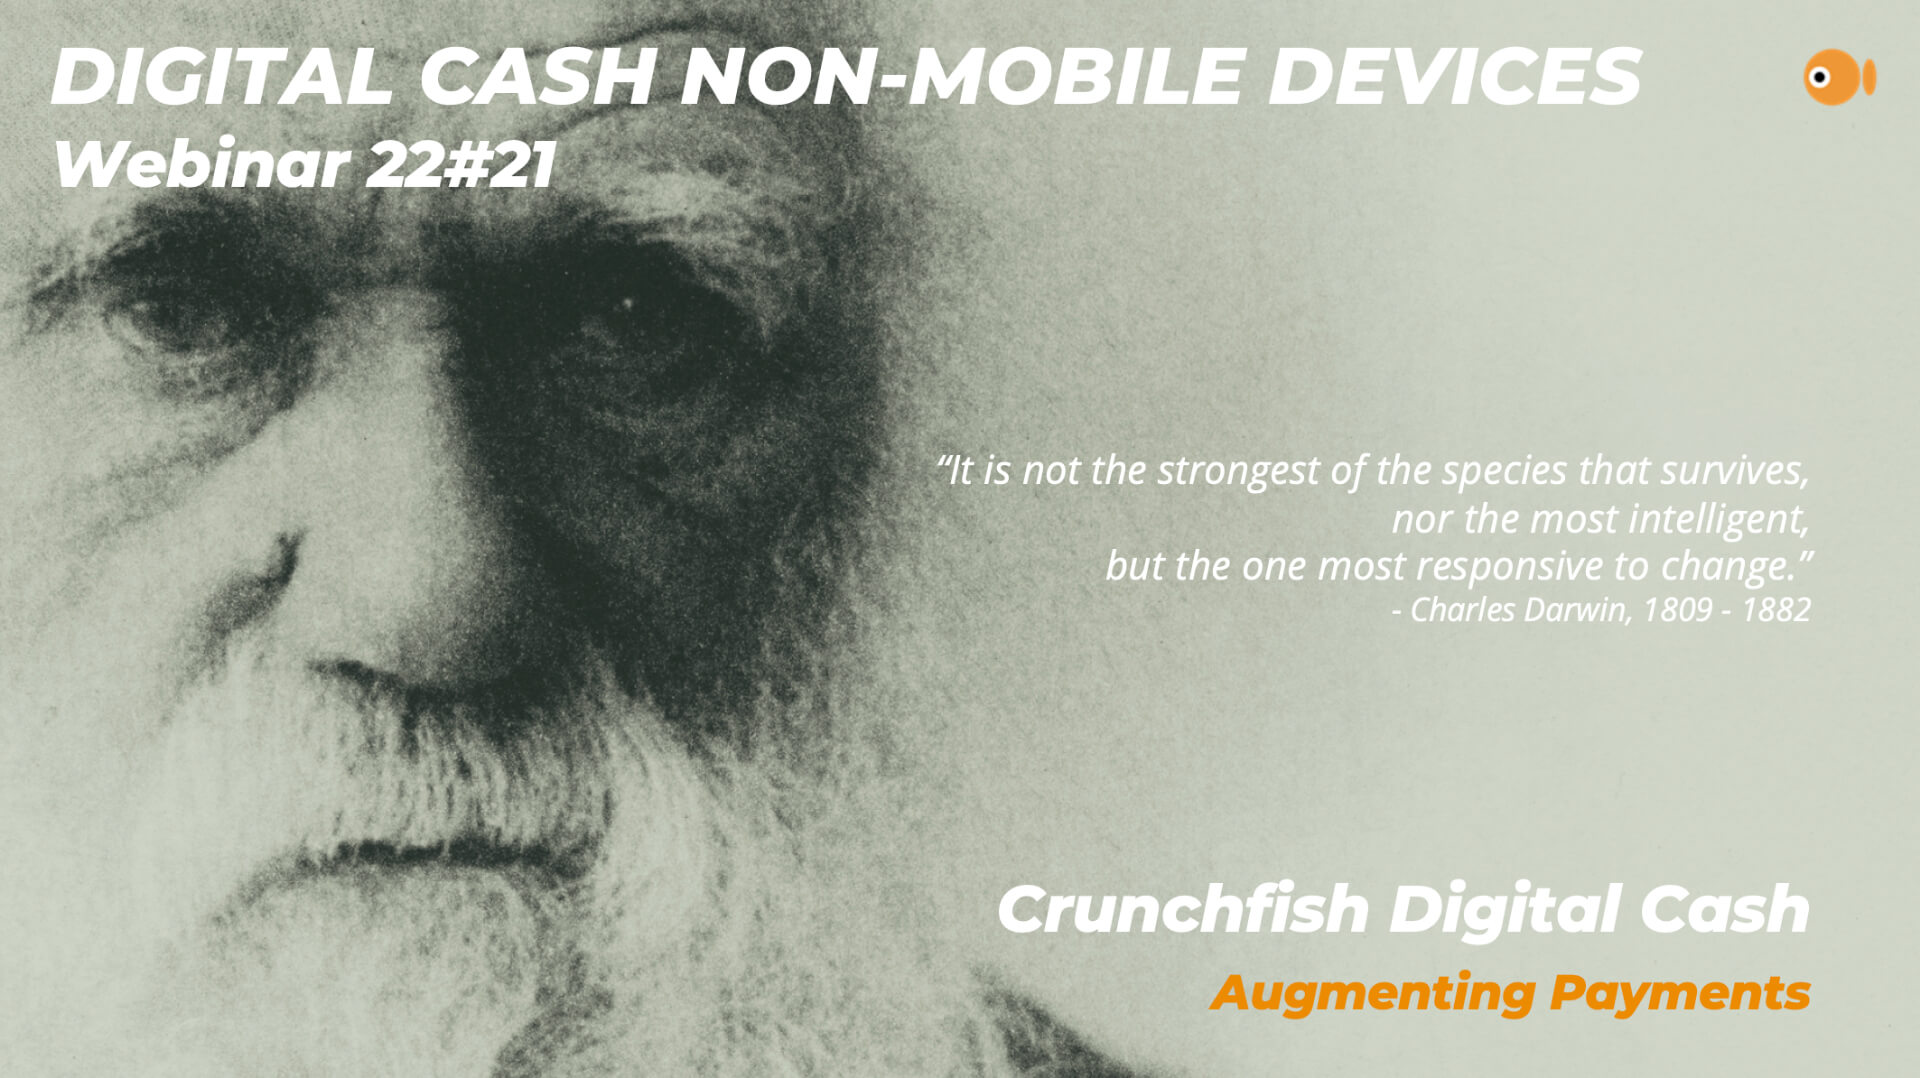 Digital Cash for non-mobile devices